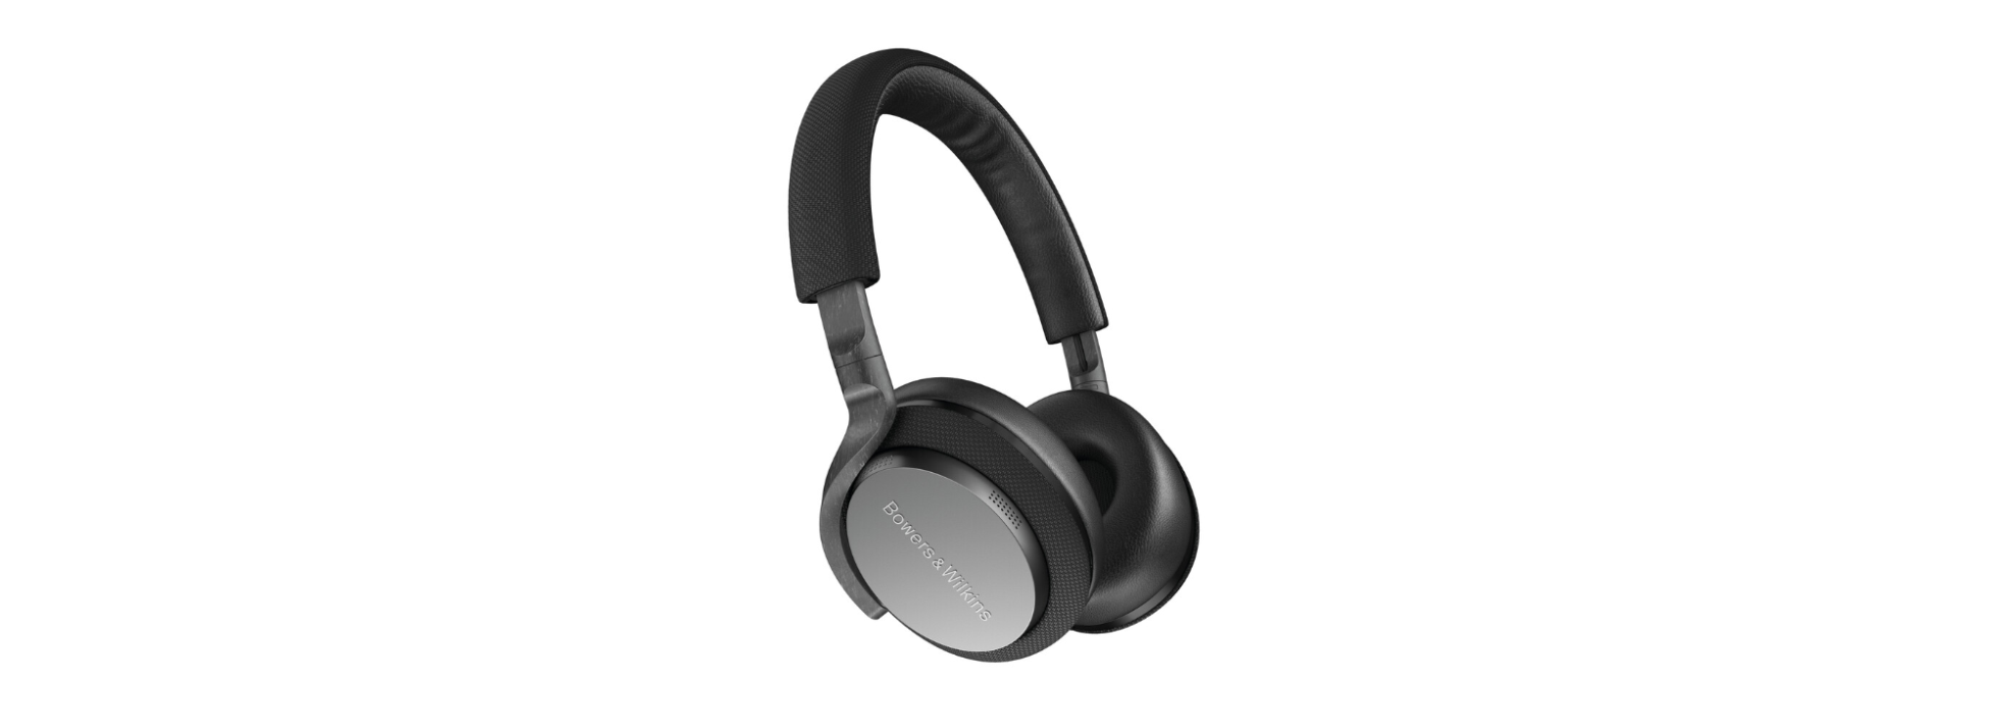 BOWERS & WILKINS PX5 NOISE CANCELLING WIRELESS HEADPHONE SPACE GREY - IN STOCK